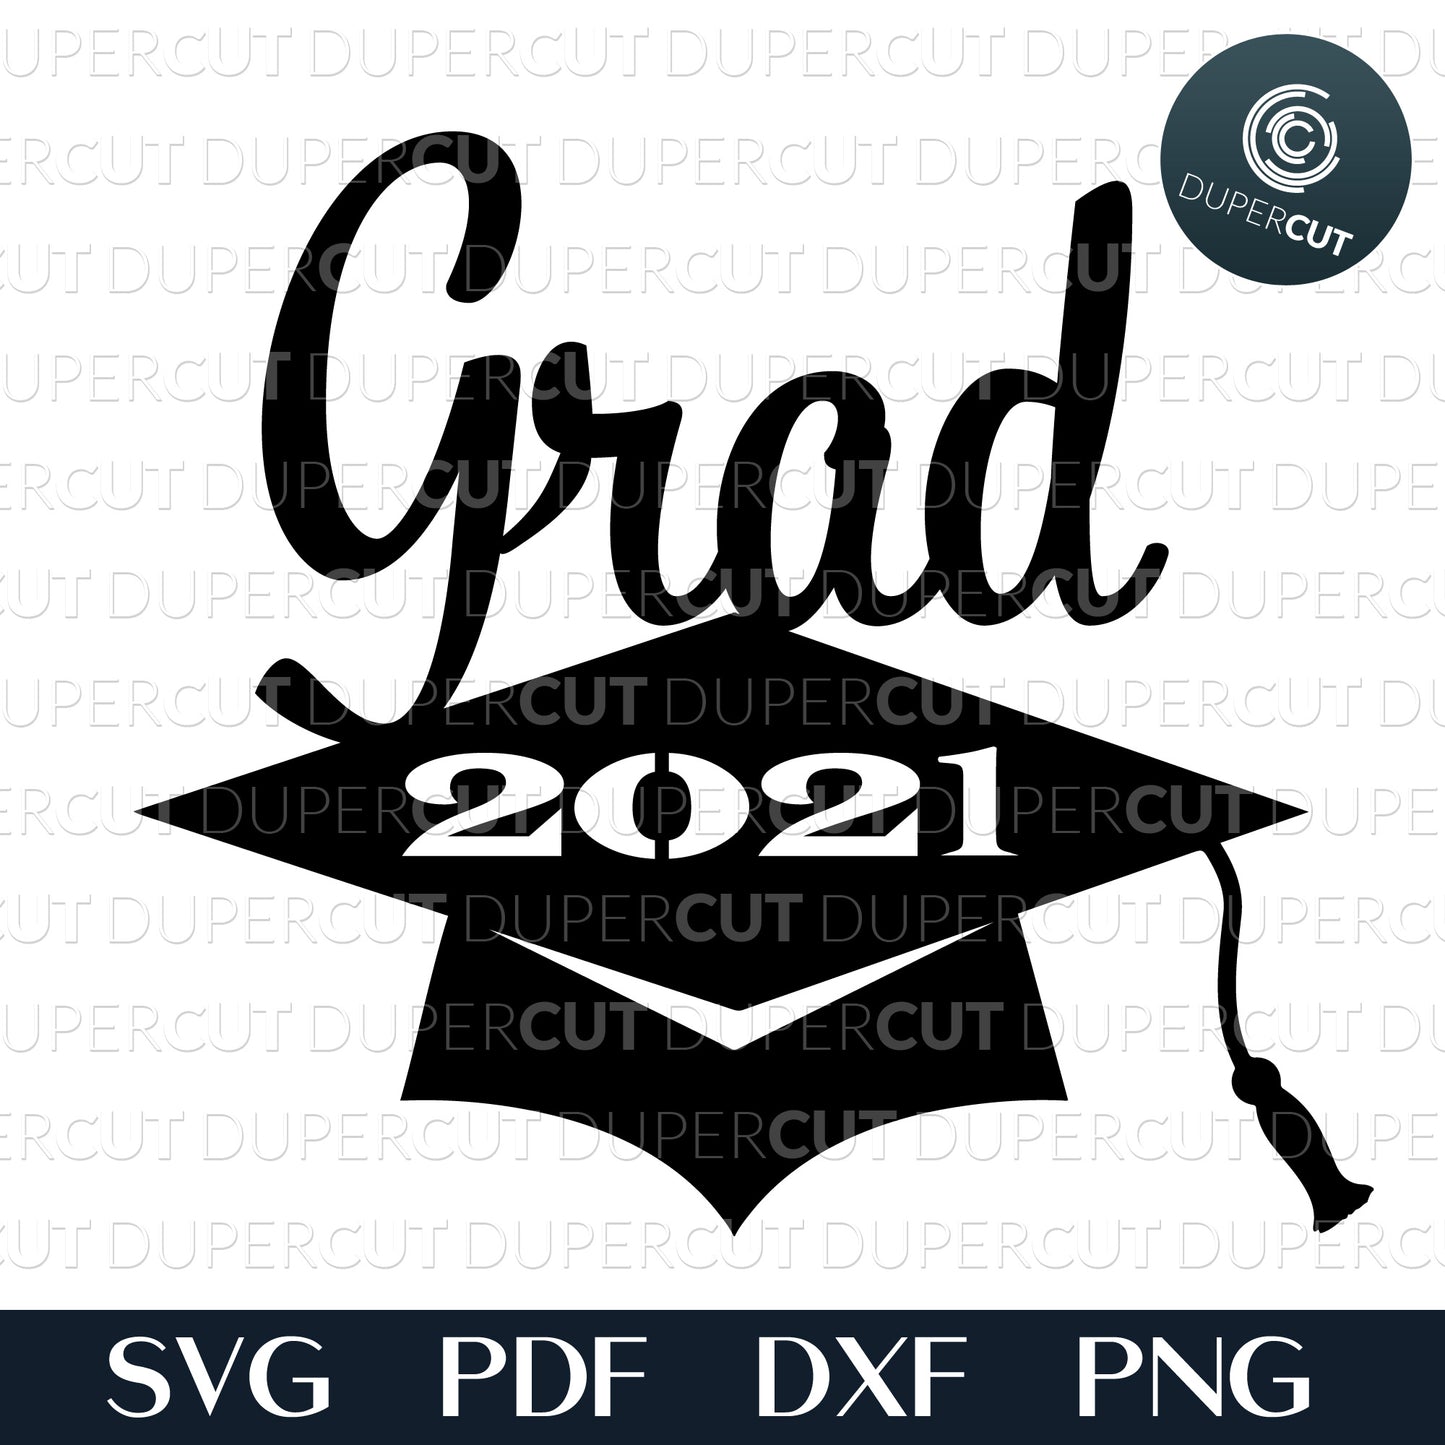 Grad hat 2021, cake topper template, SVG PNG DXF files for cutting, laser engraving, scrapbooking. For use with Cricut, Glowforge, Silhouette, CNC machines.